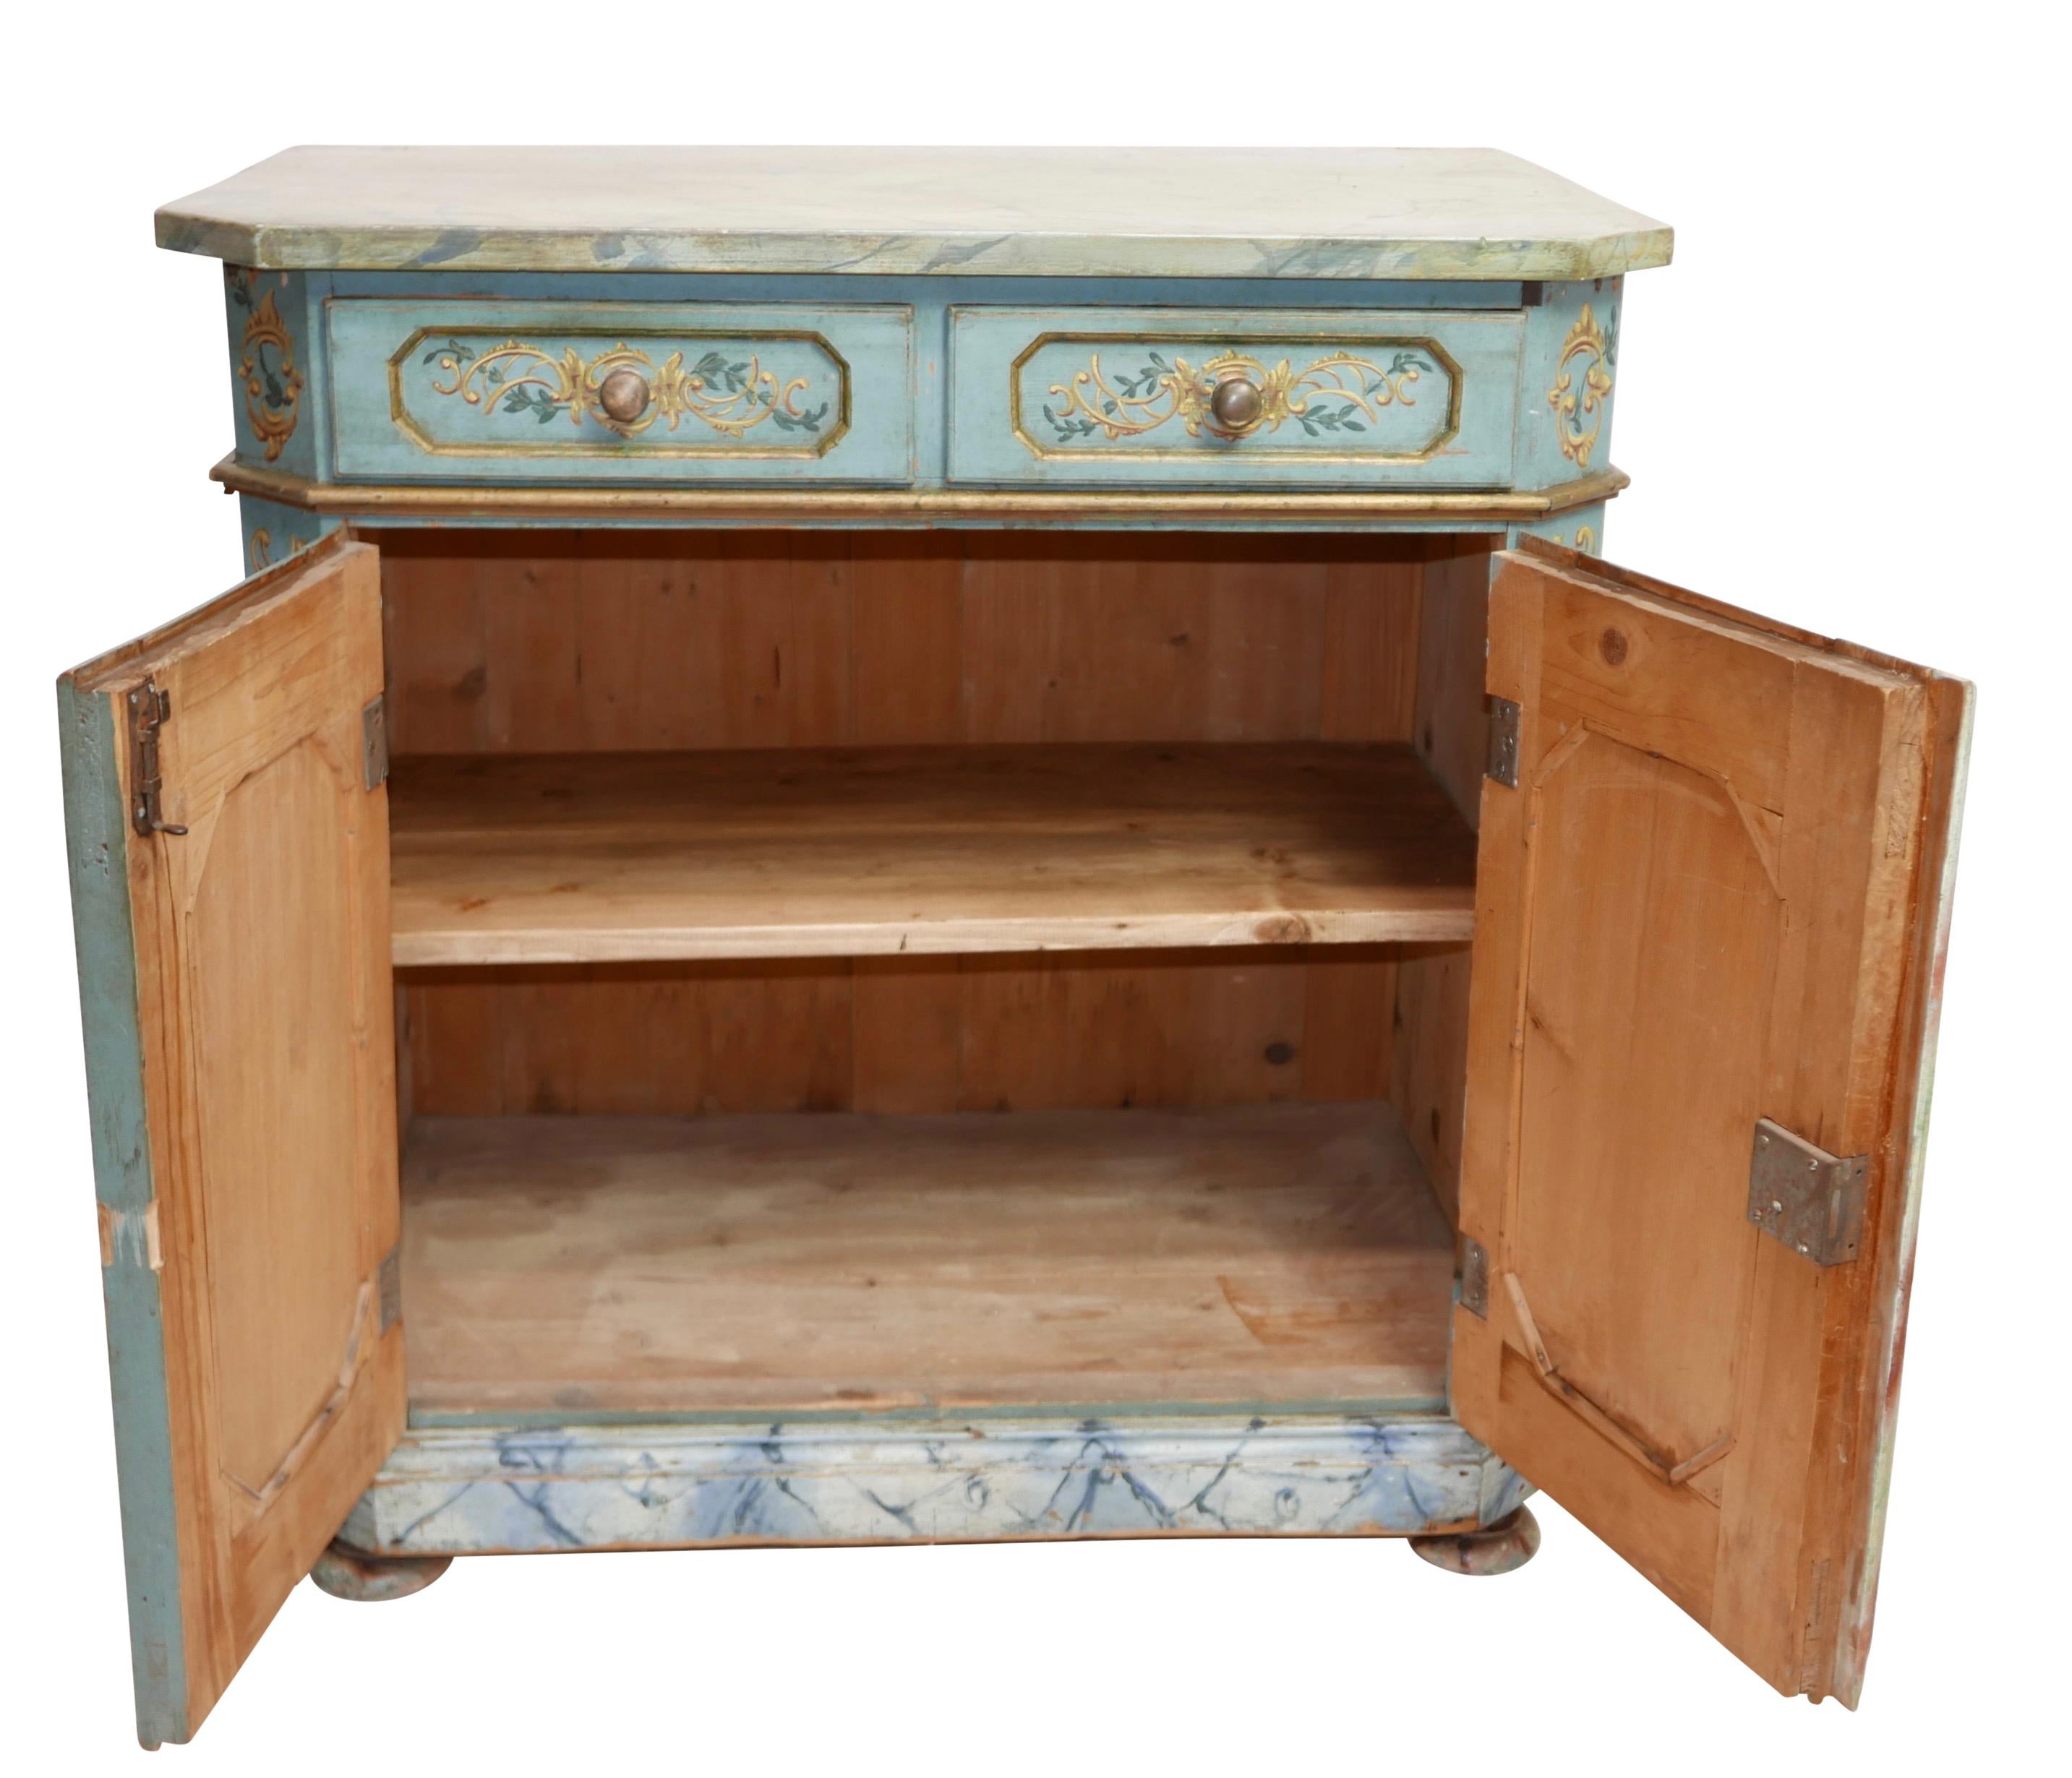 Scandinavian Hand Painted and Faux Marble Buffet Cabinet, Swiss or Swedish circa 1830